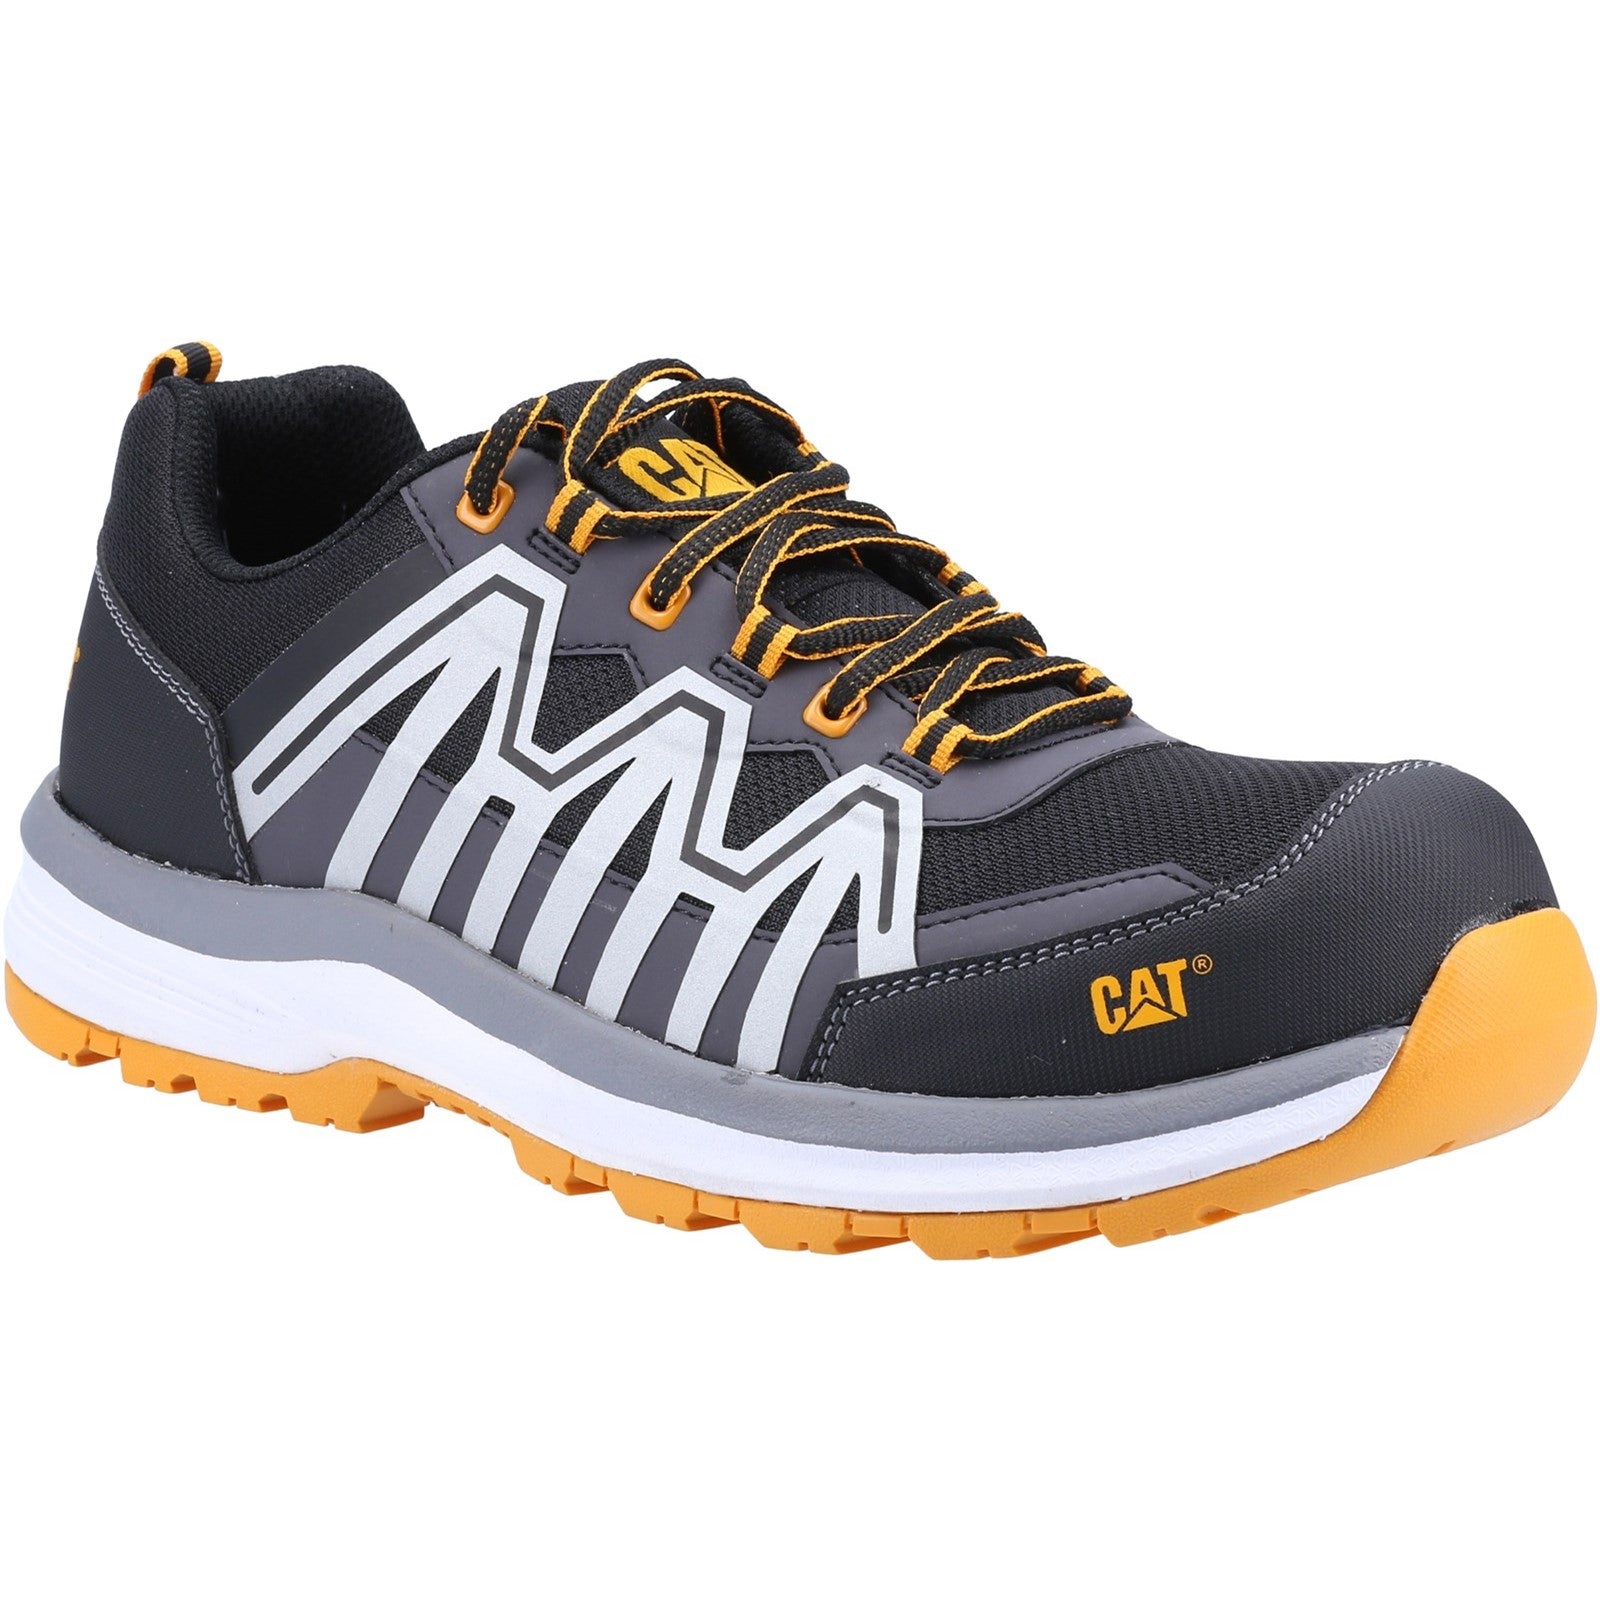 Caterpillar Charge S3 Safety Trainer in Orange